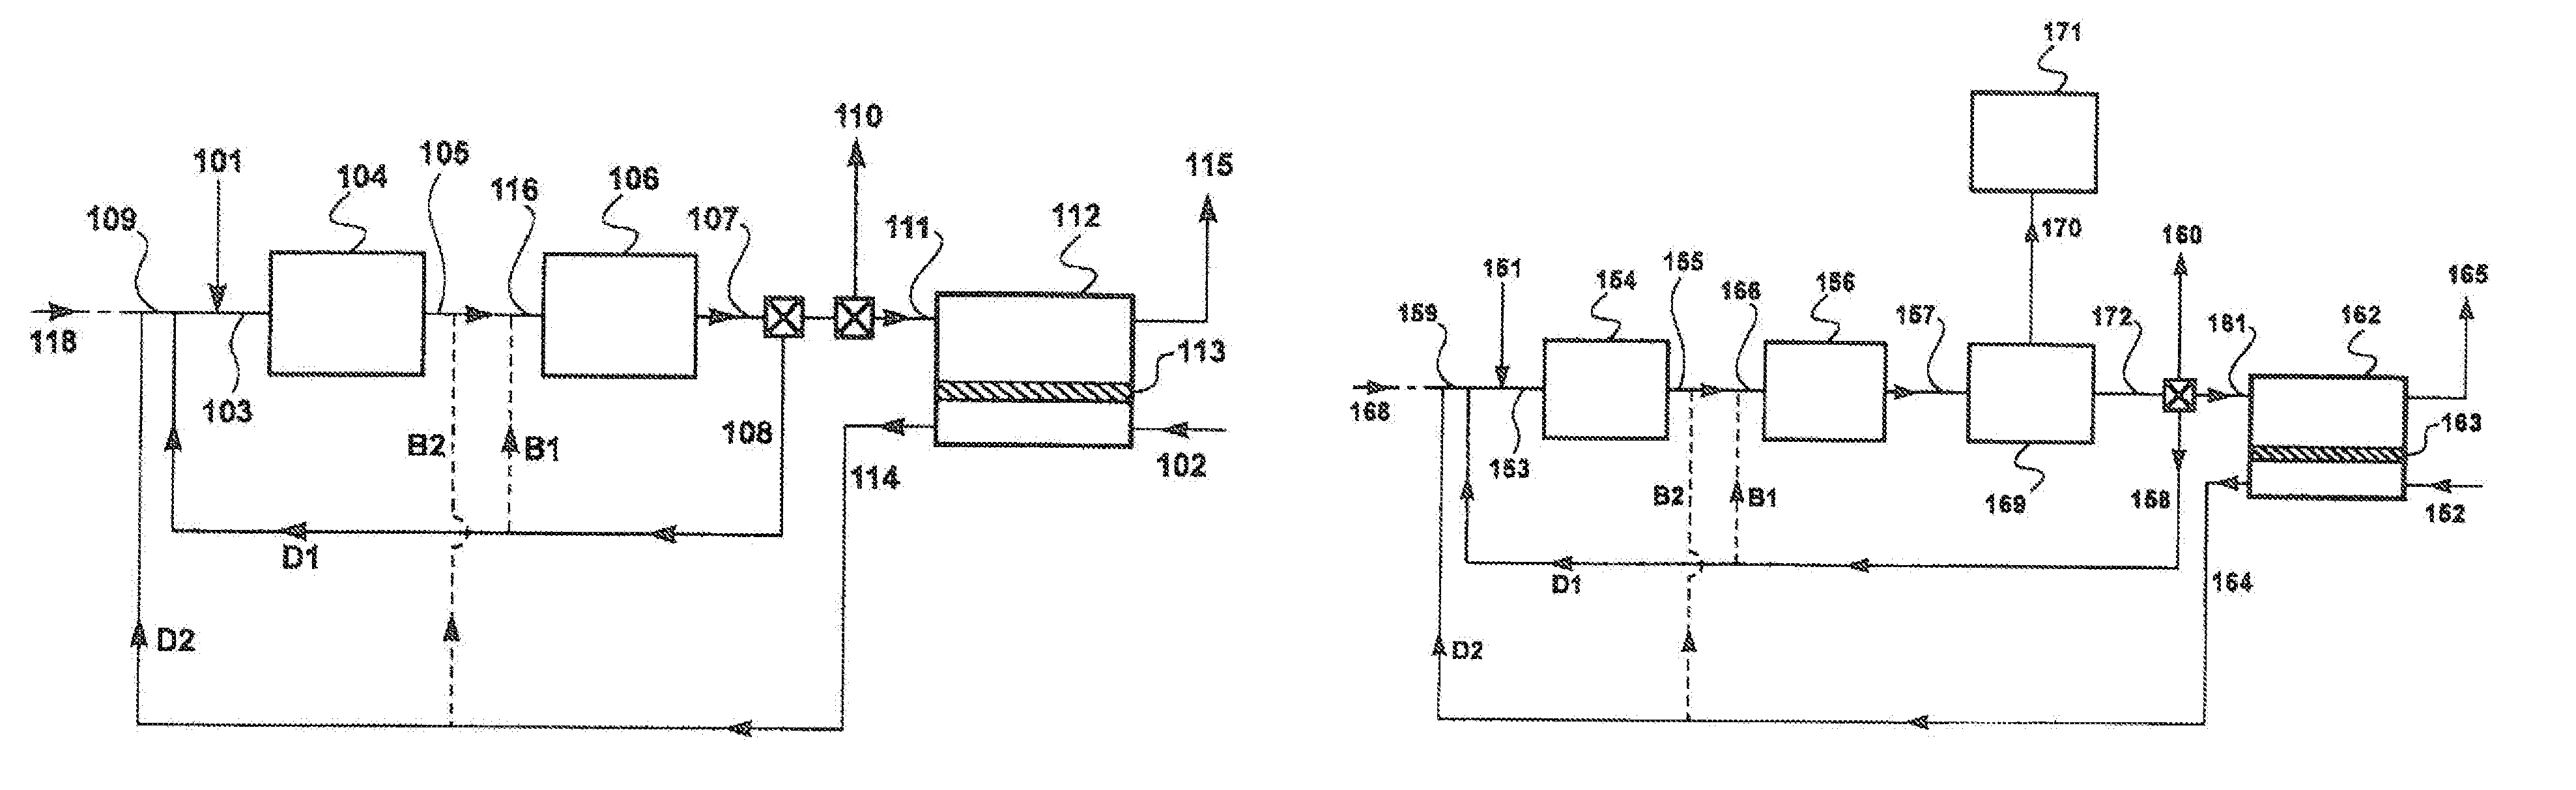 Membrane Technology for Use in a Power Generation Process